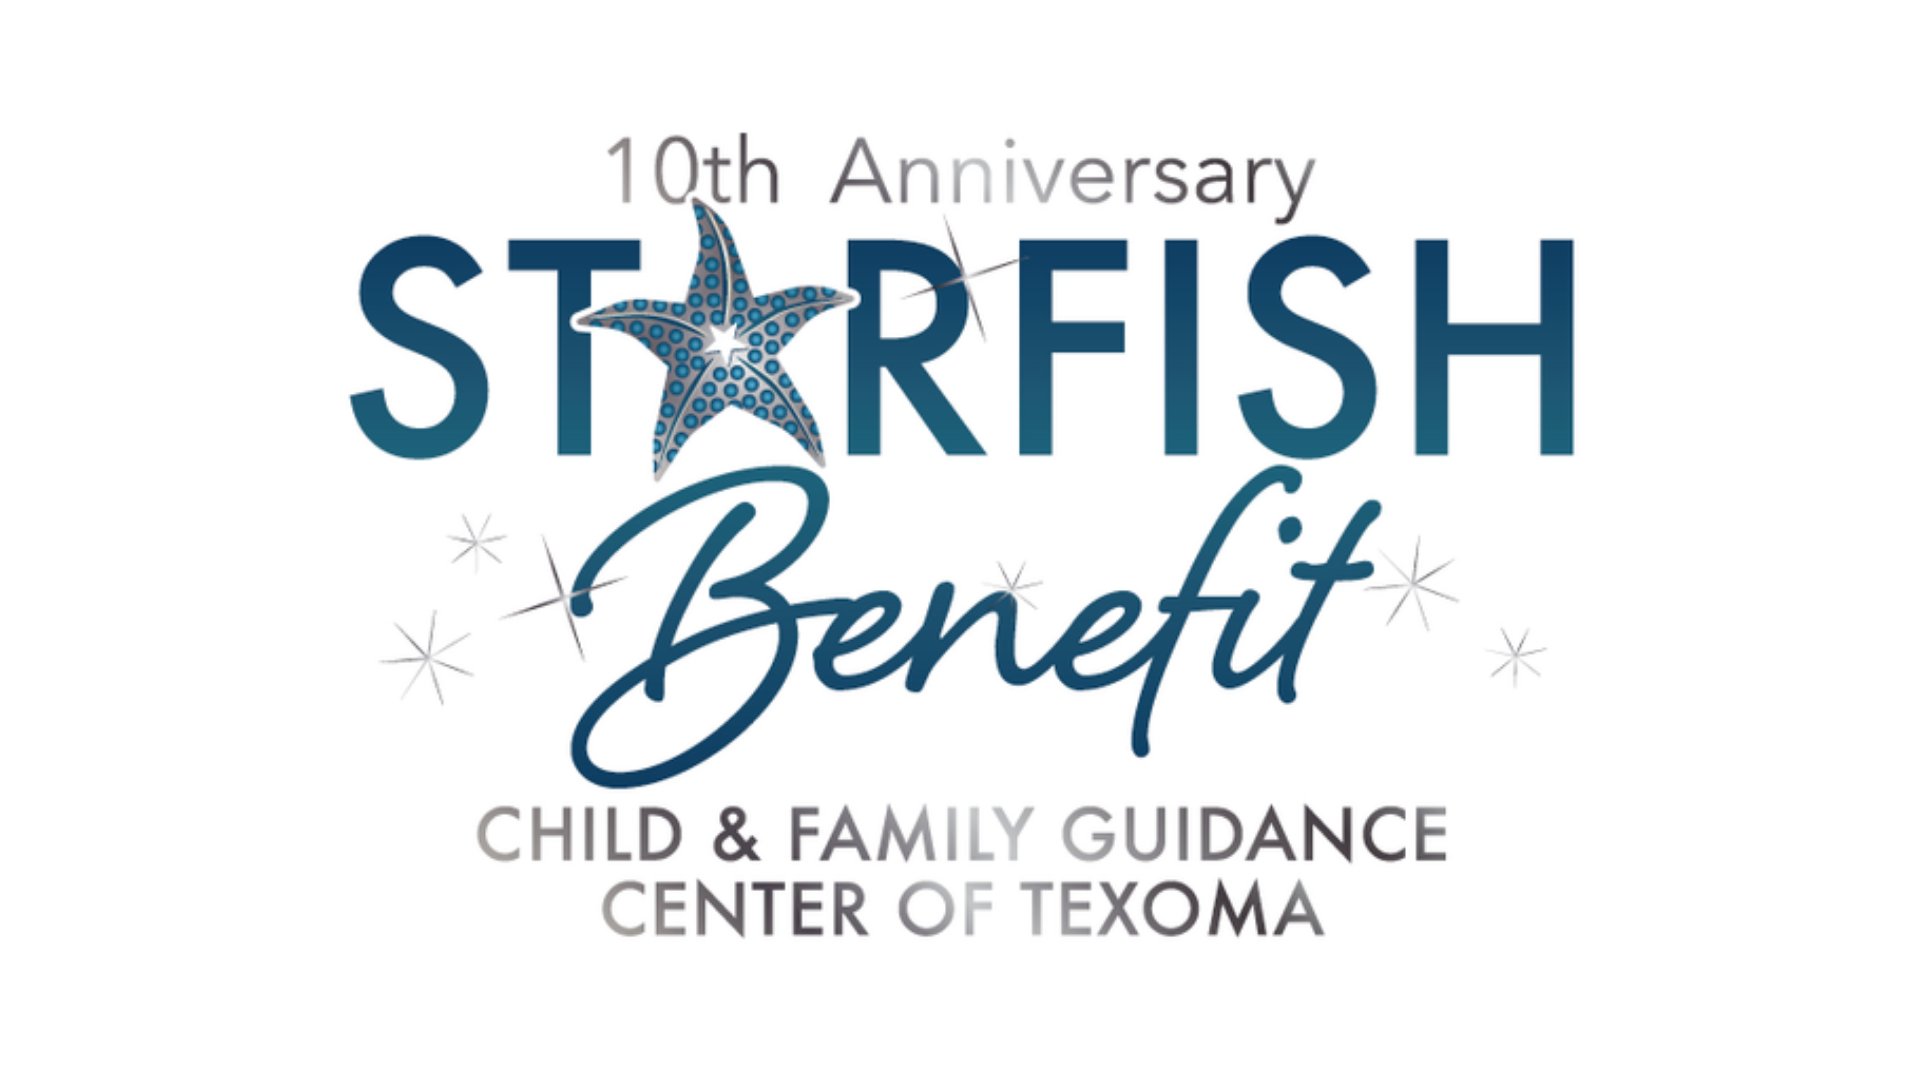 Blue and silver text reads 10th Anniversary Starfish Benefit with a blue starfish for the A in Starfish. Silver text under this reads Child &Family Guidance Center of Texoma